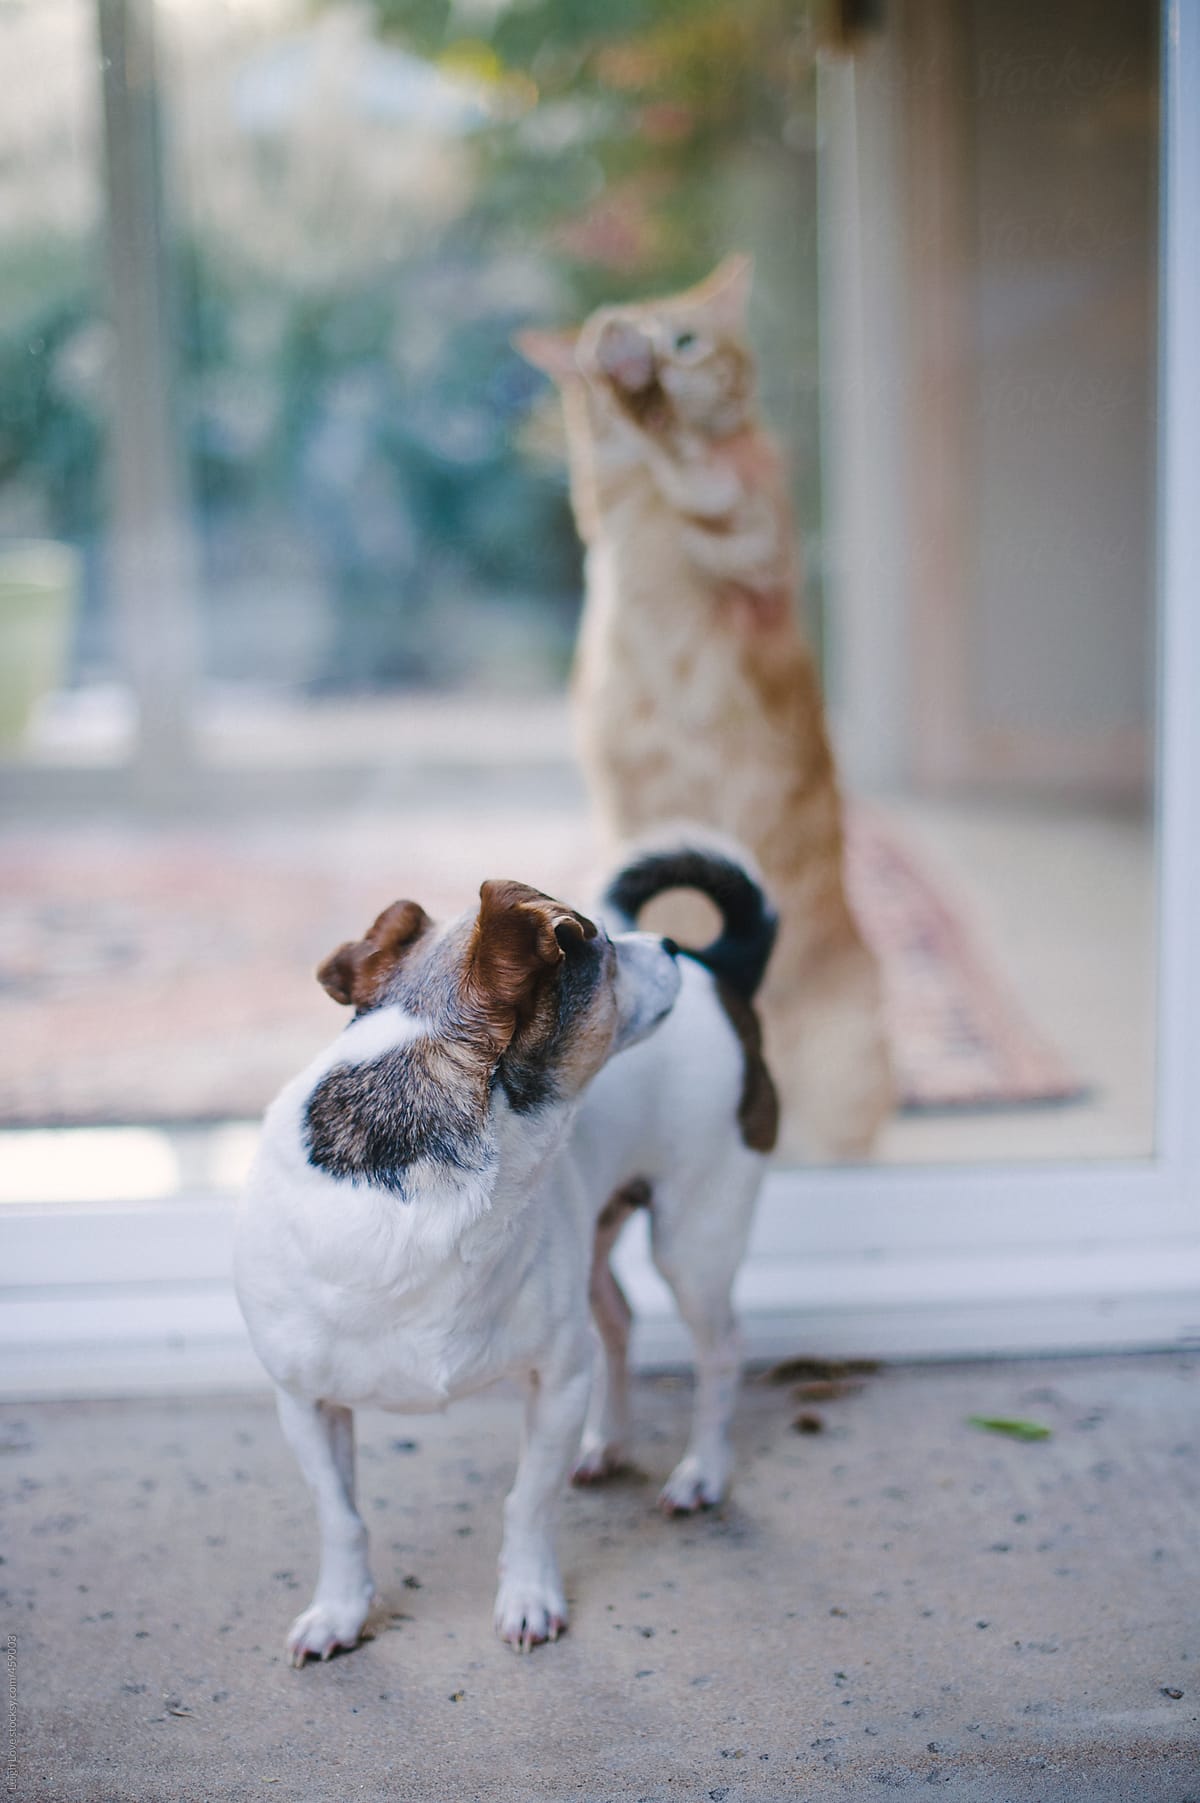 Jack Russell Dog Outside Looks at Tabby Cat Inside